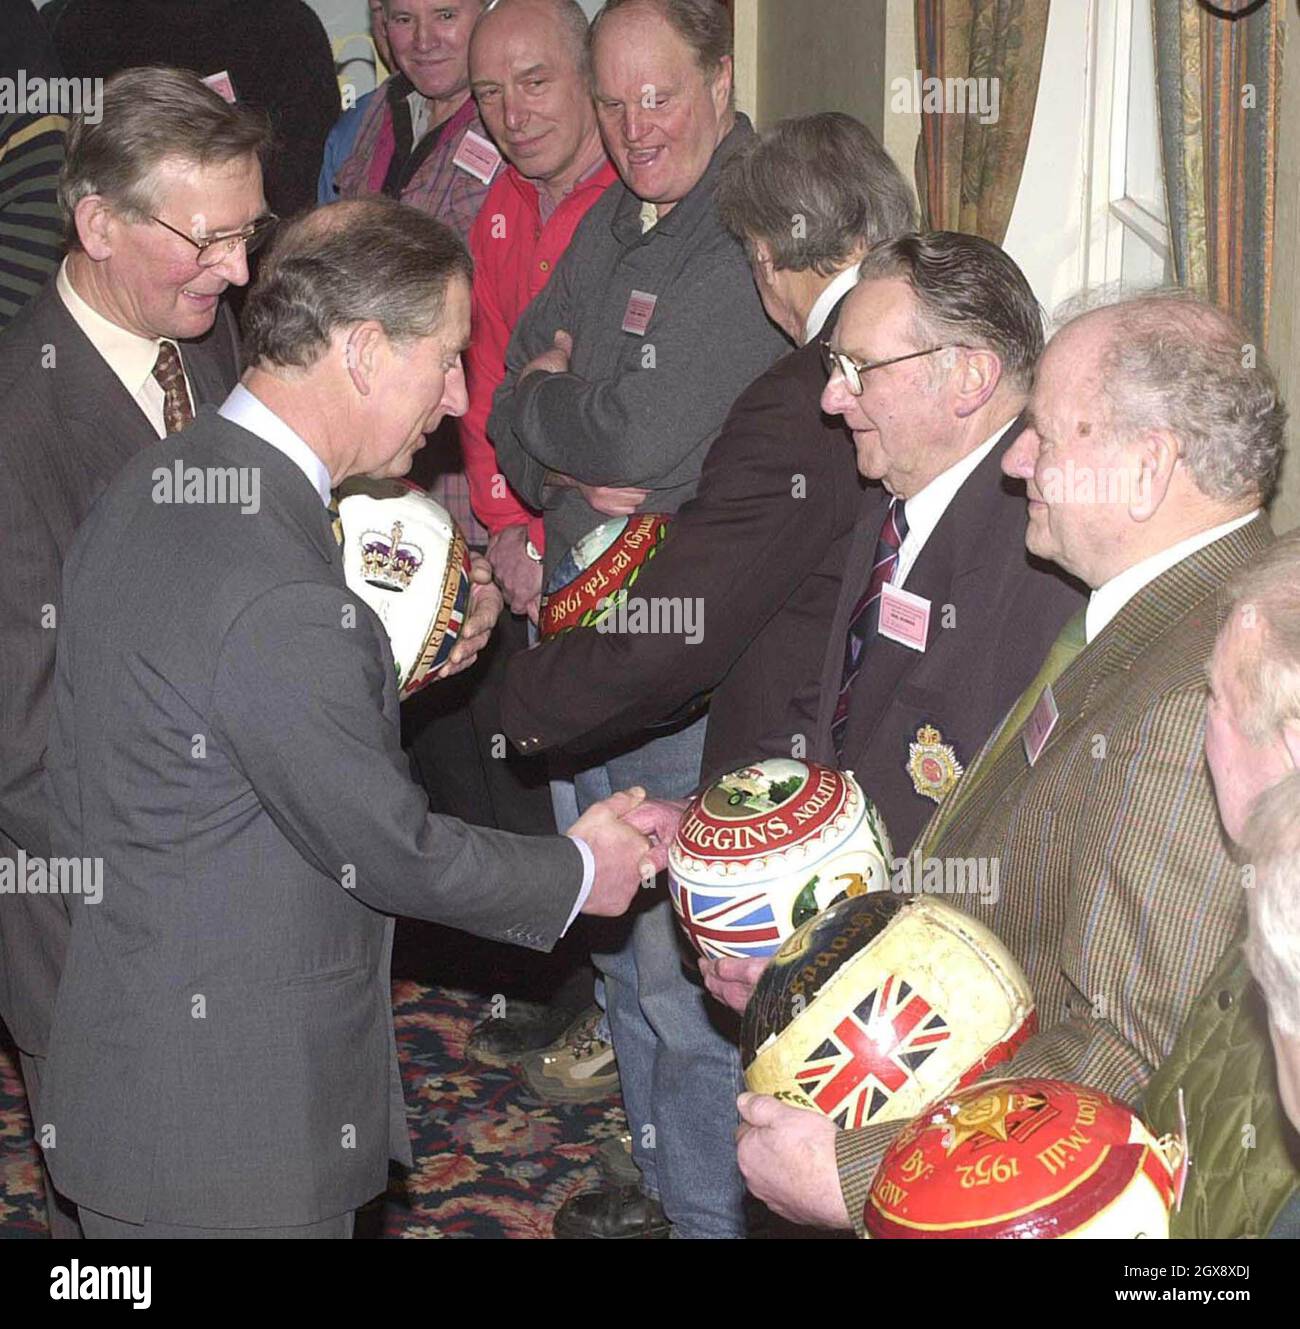 The Prince of Wales meets past scorers and ball painters before the annual game in Ashbourne, derbyshire.  Half length, royals, suit.   Â©Anwar Hussein/allaction.co.uk  Stock Photo